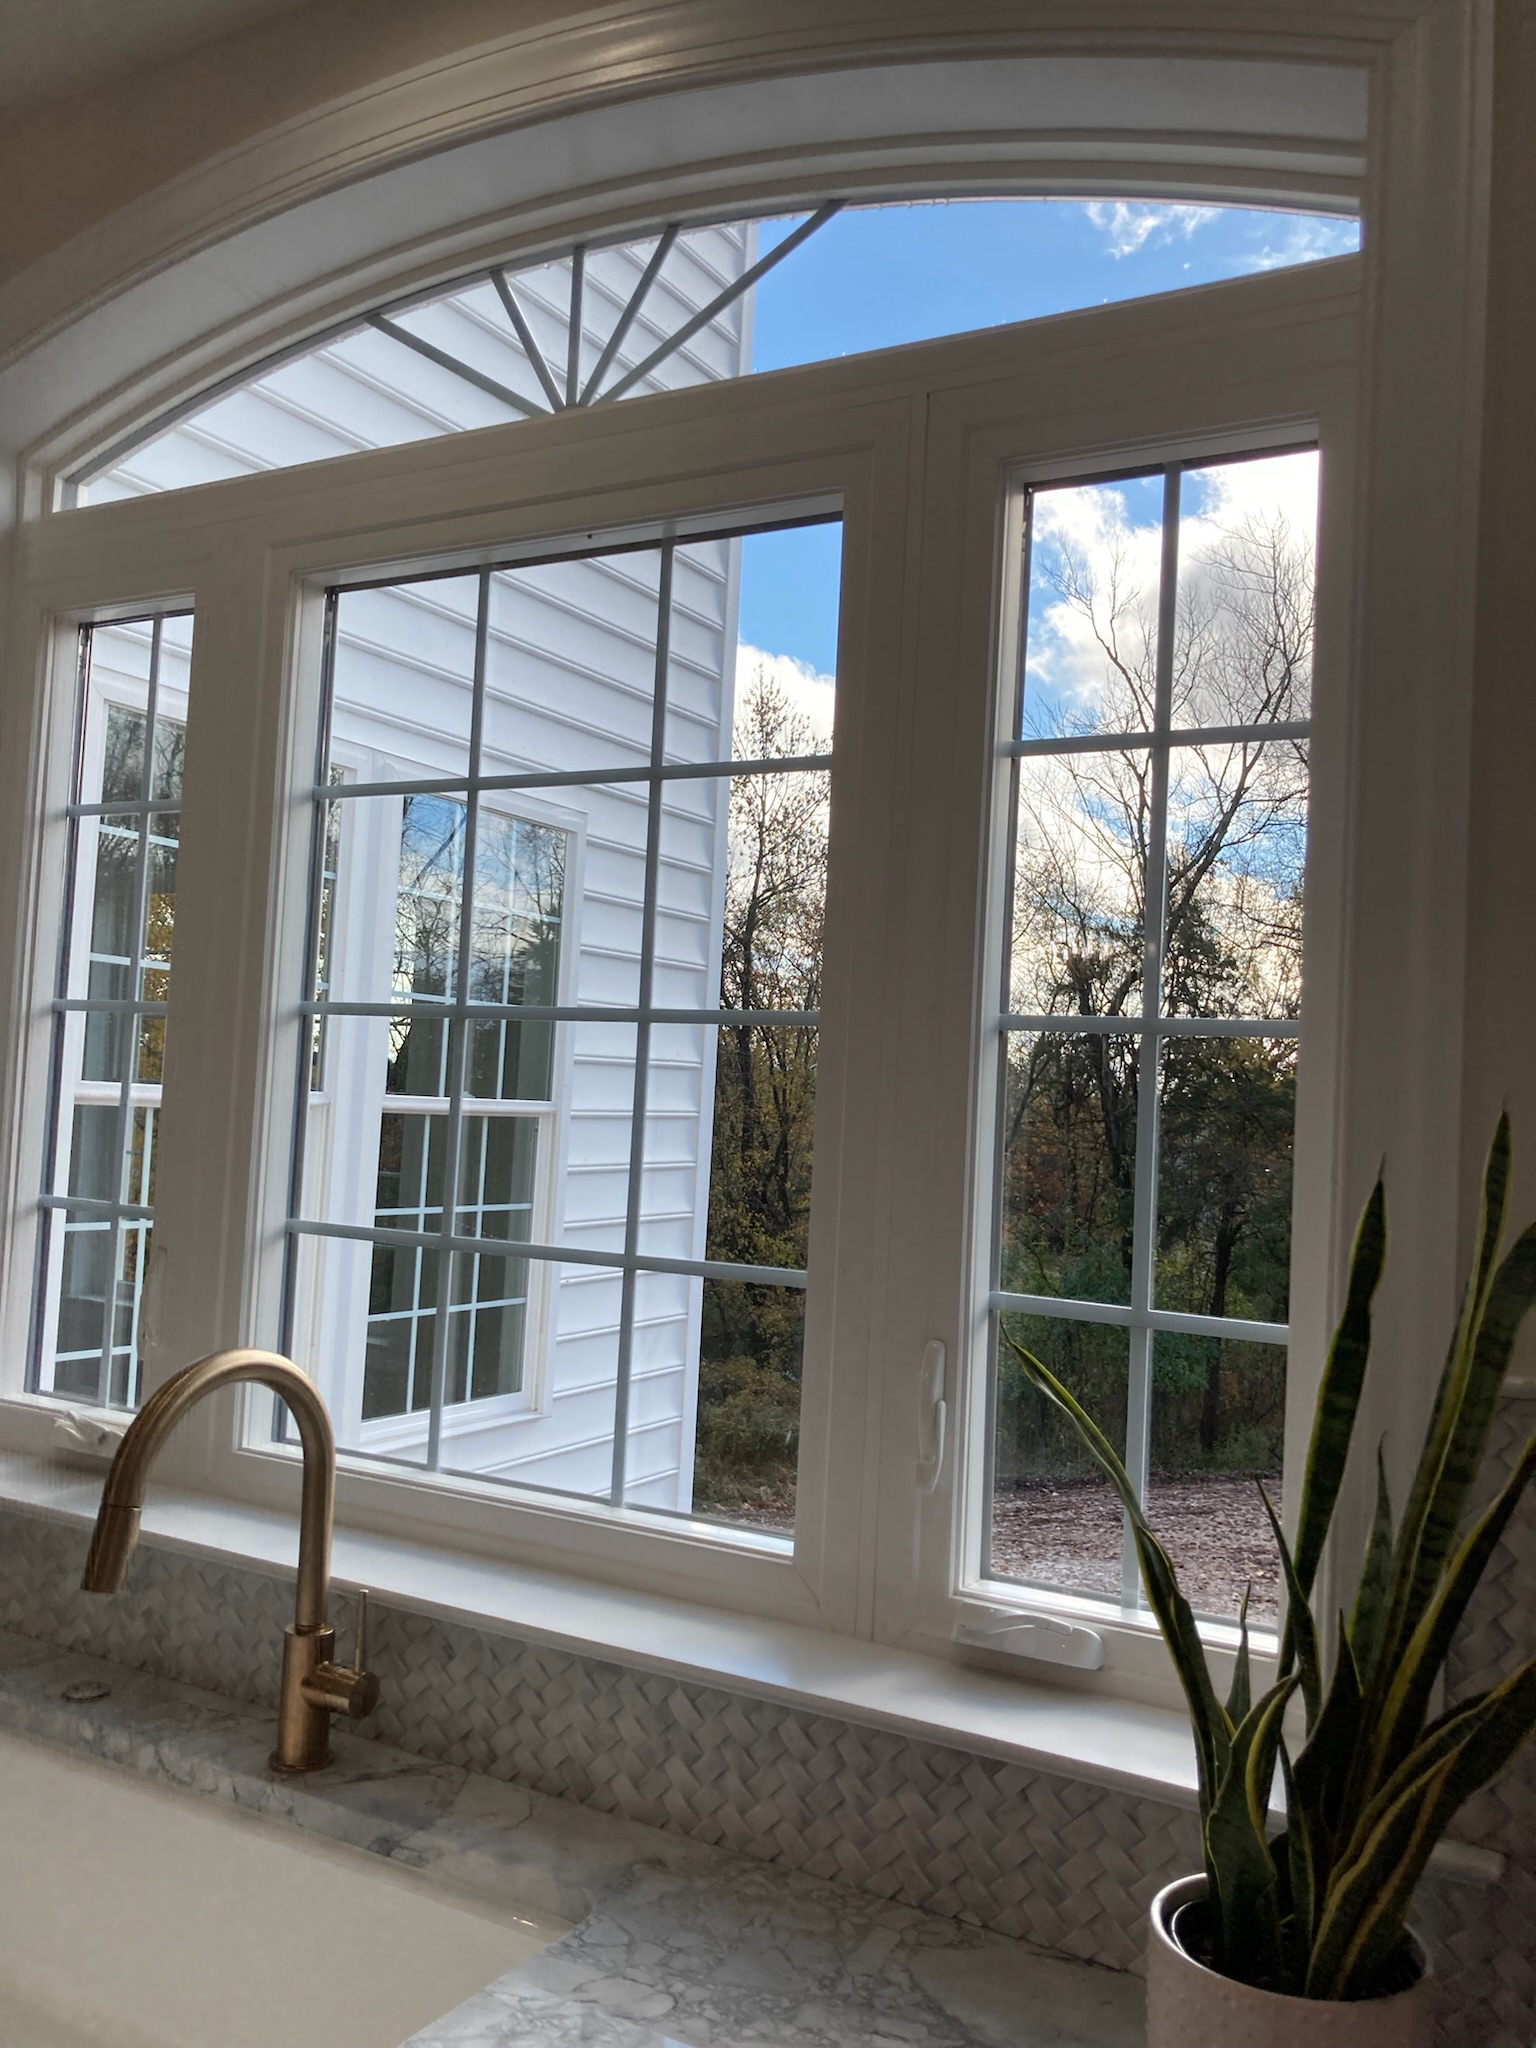 A large white window above the kitchen sink